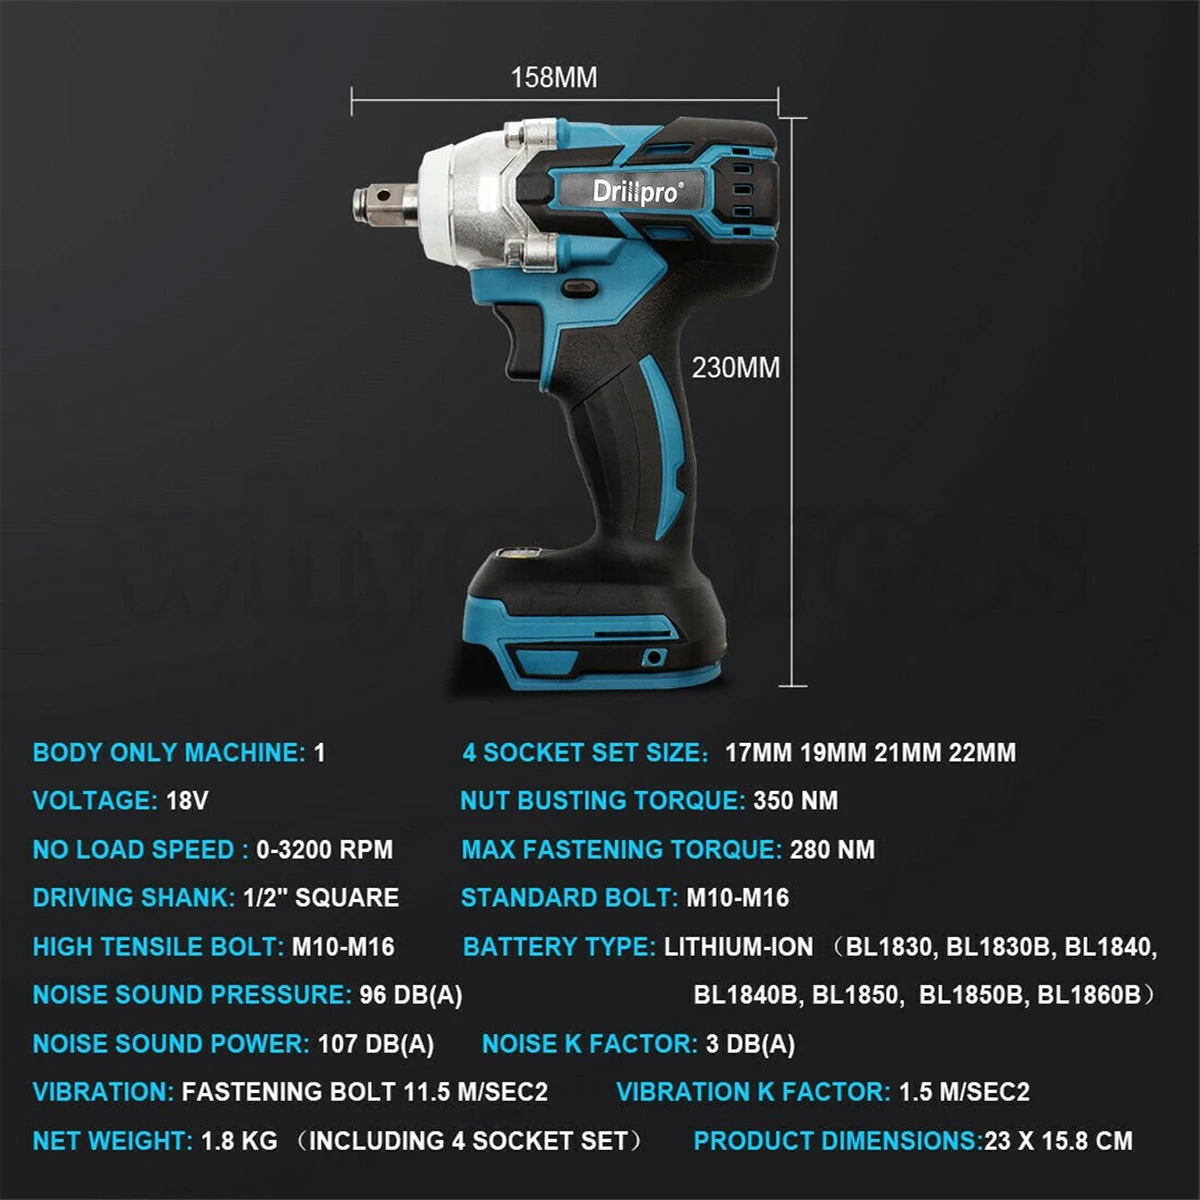 

CN Drillpro Cordles Brushless Electric Impact Wrench 1/2 inch Power Tool With LED Light for Makita 18V Battery